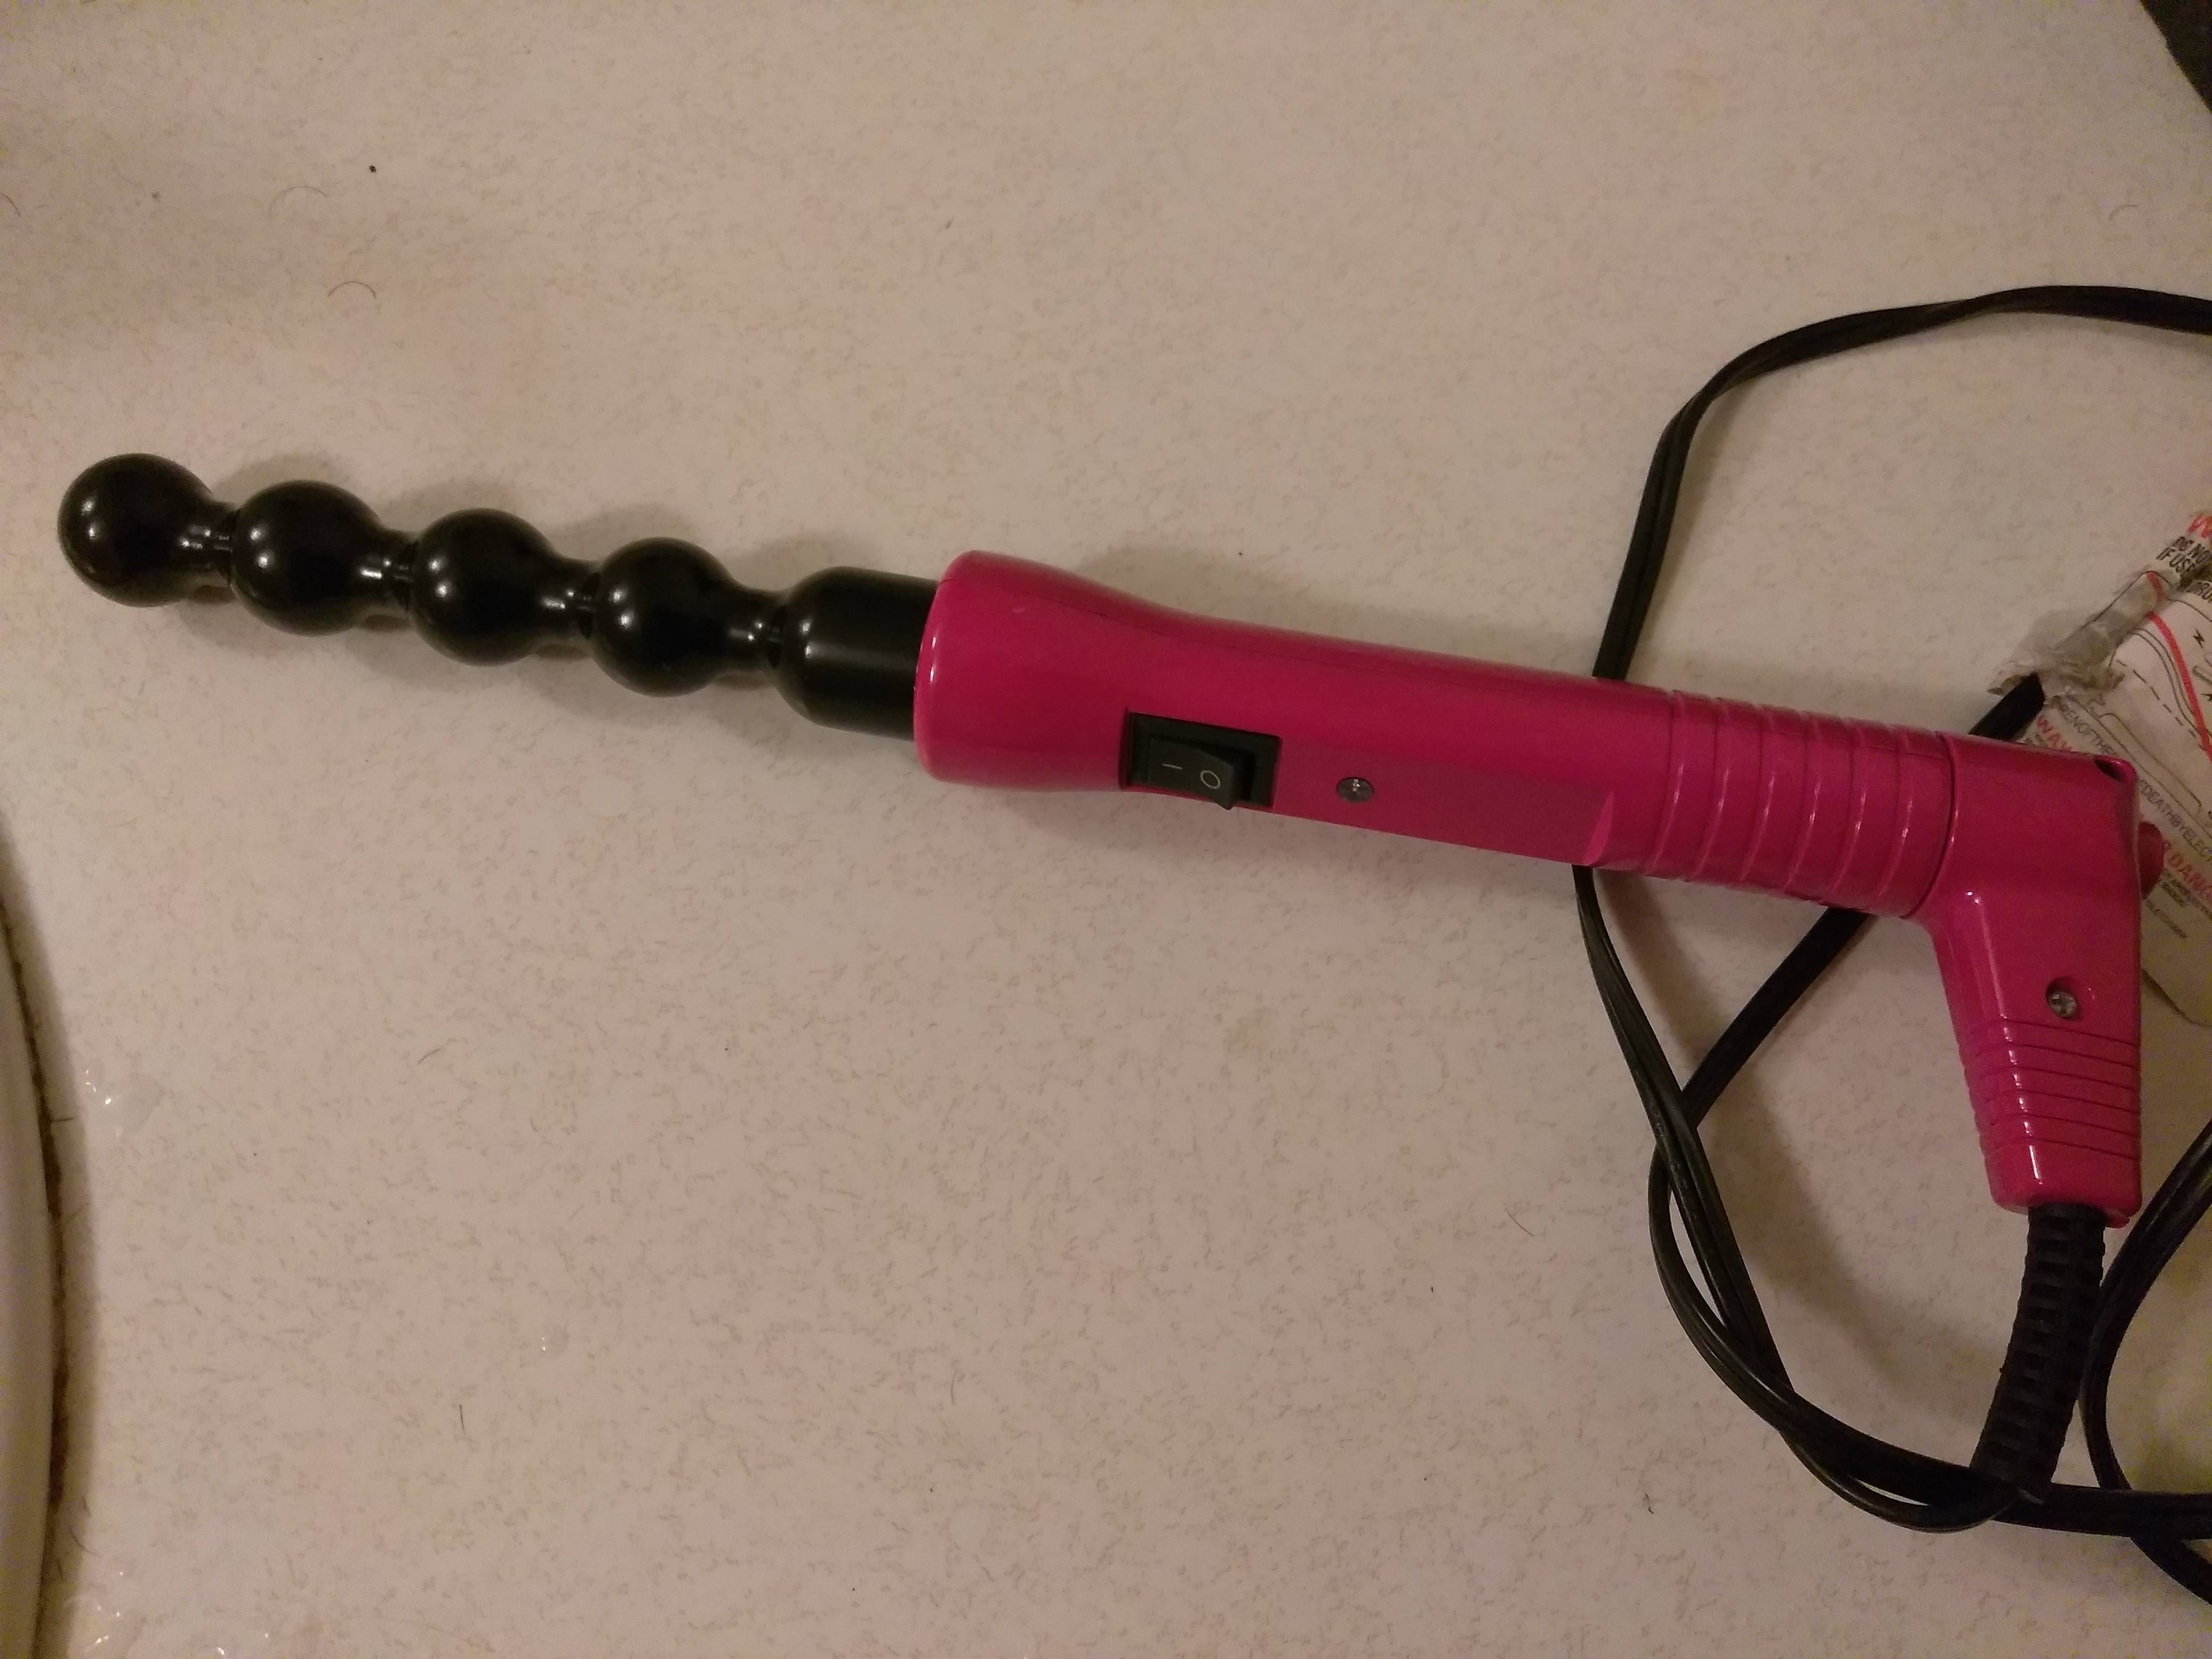 PSA: Dads, if you find this in your daughter's room... it IS a curling iron.